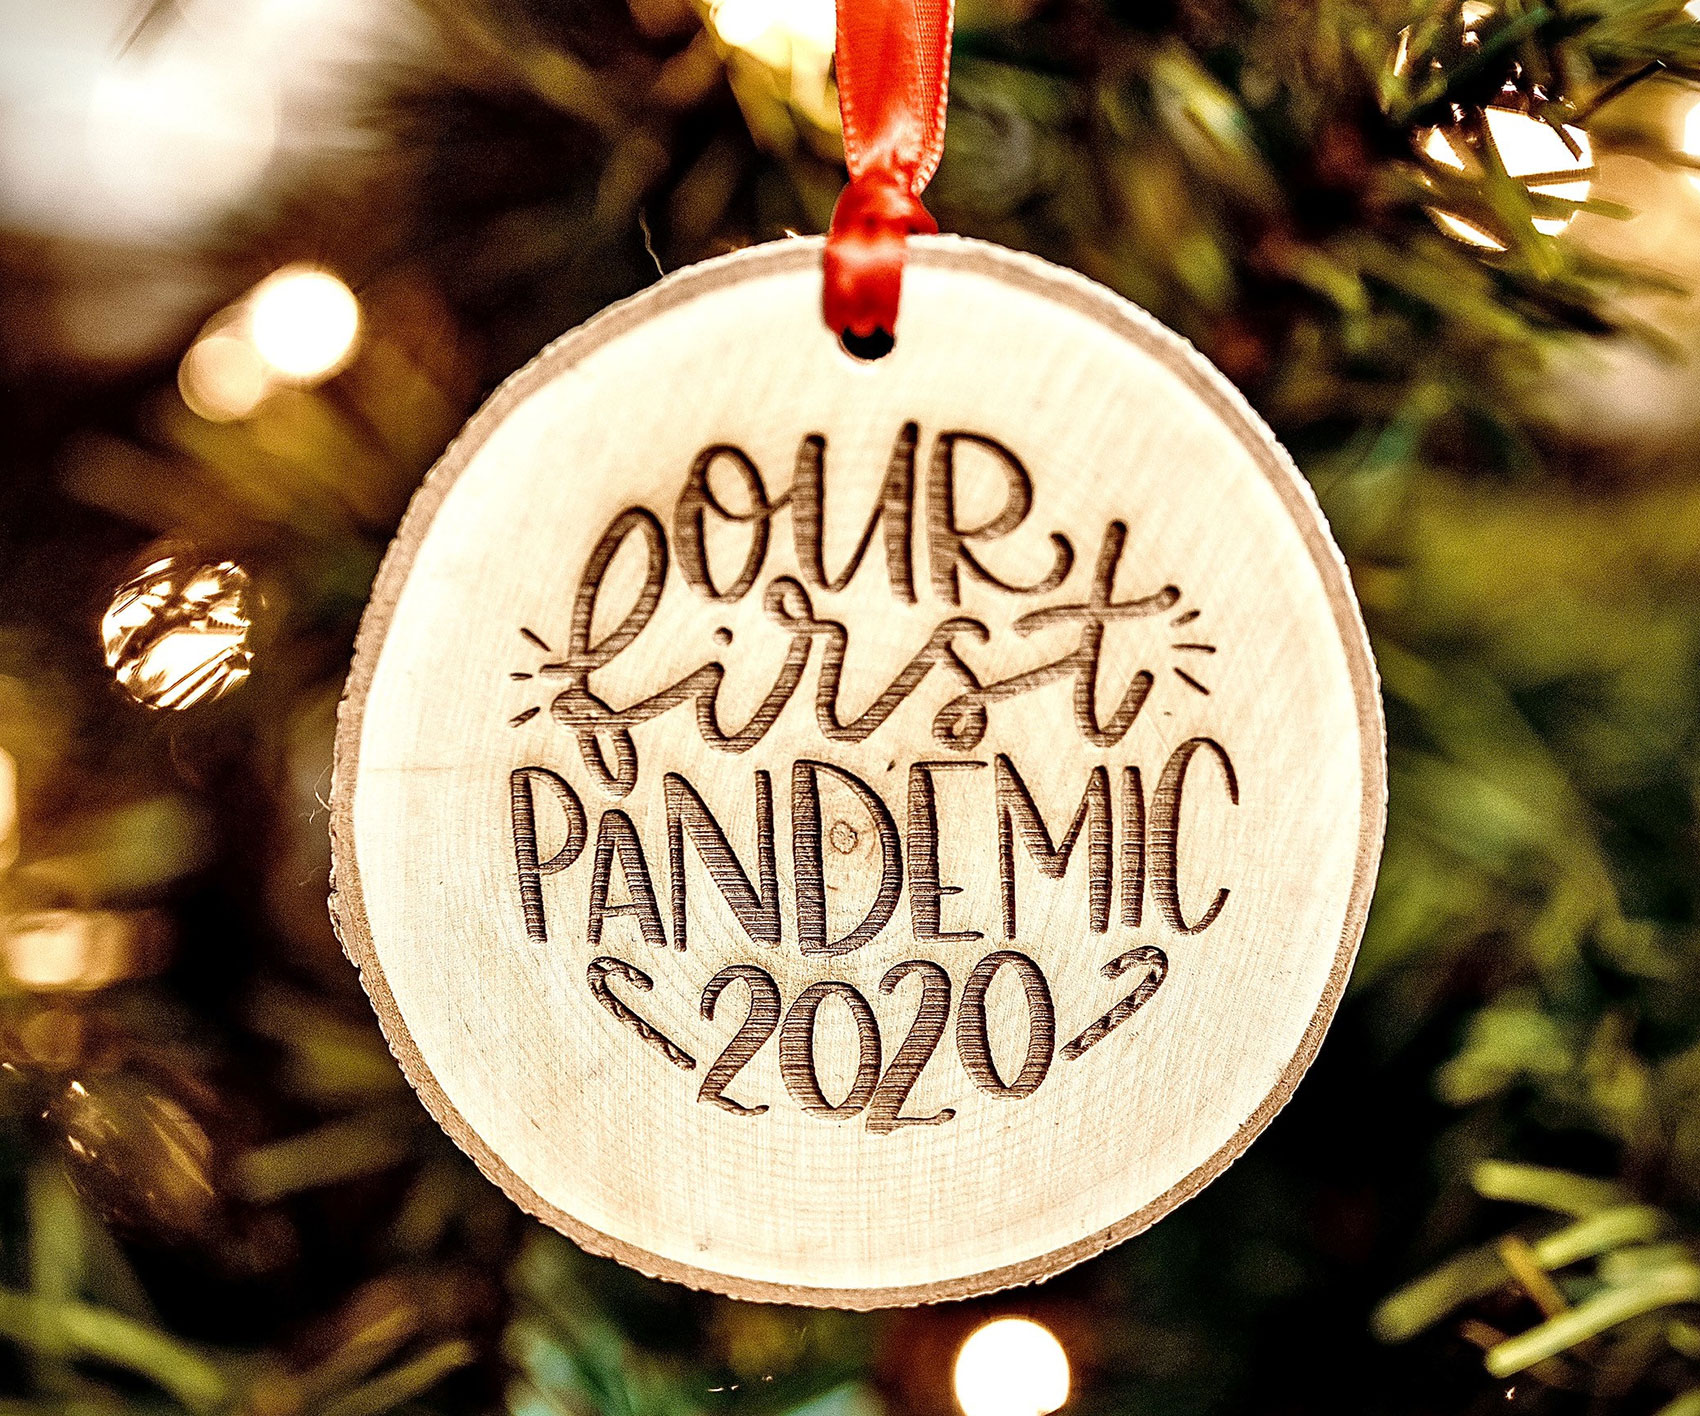 Our First Pandemic Christmas Ornament